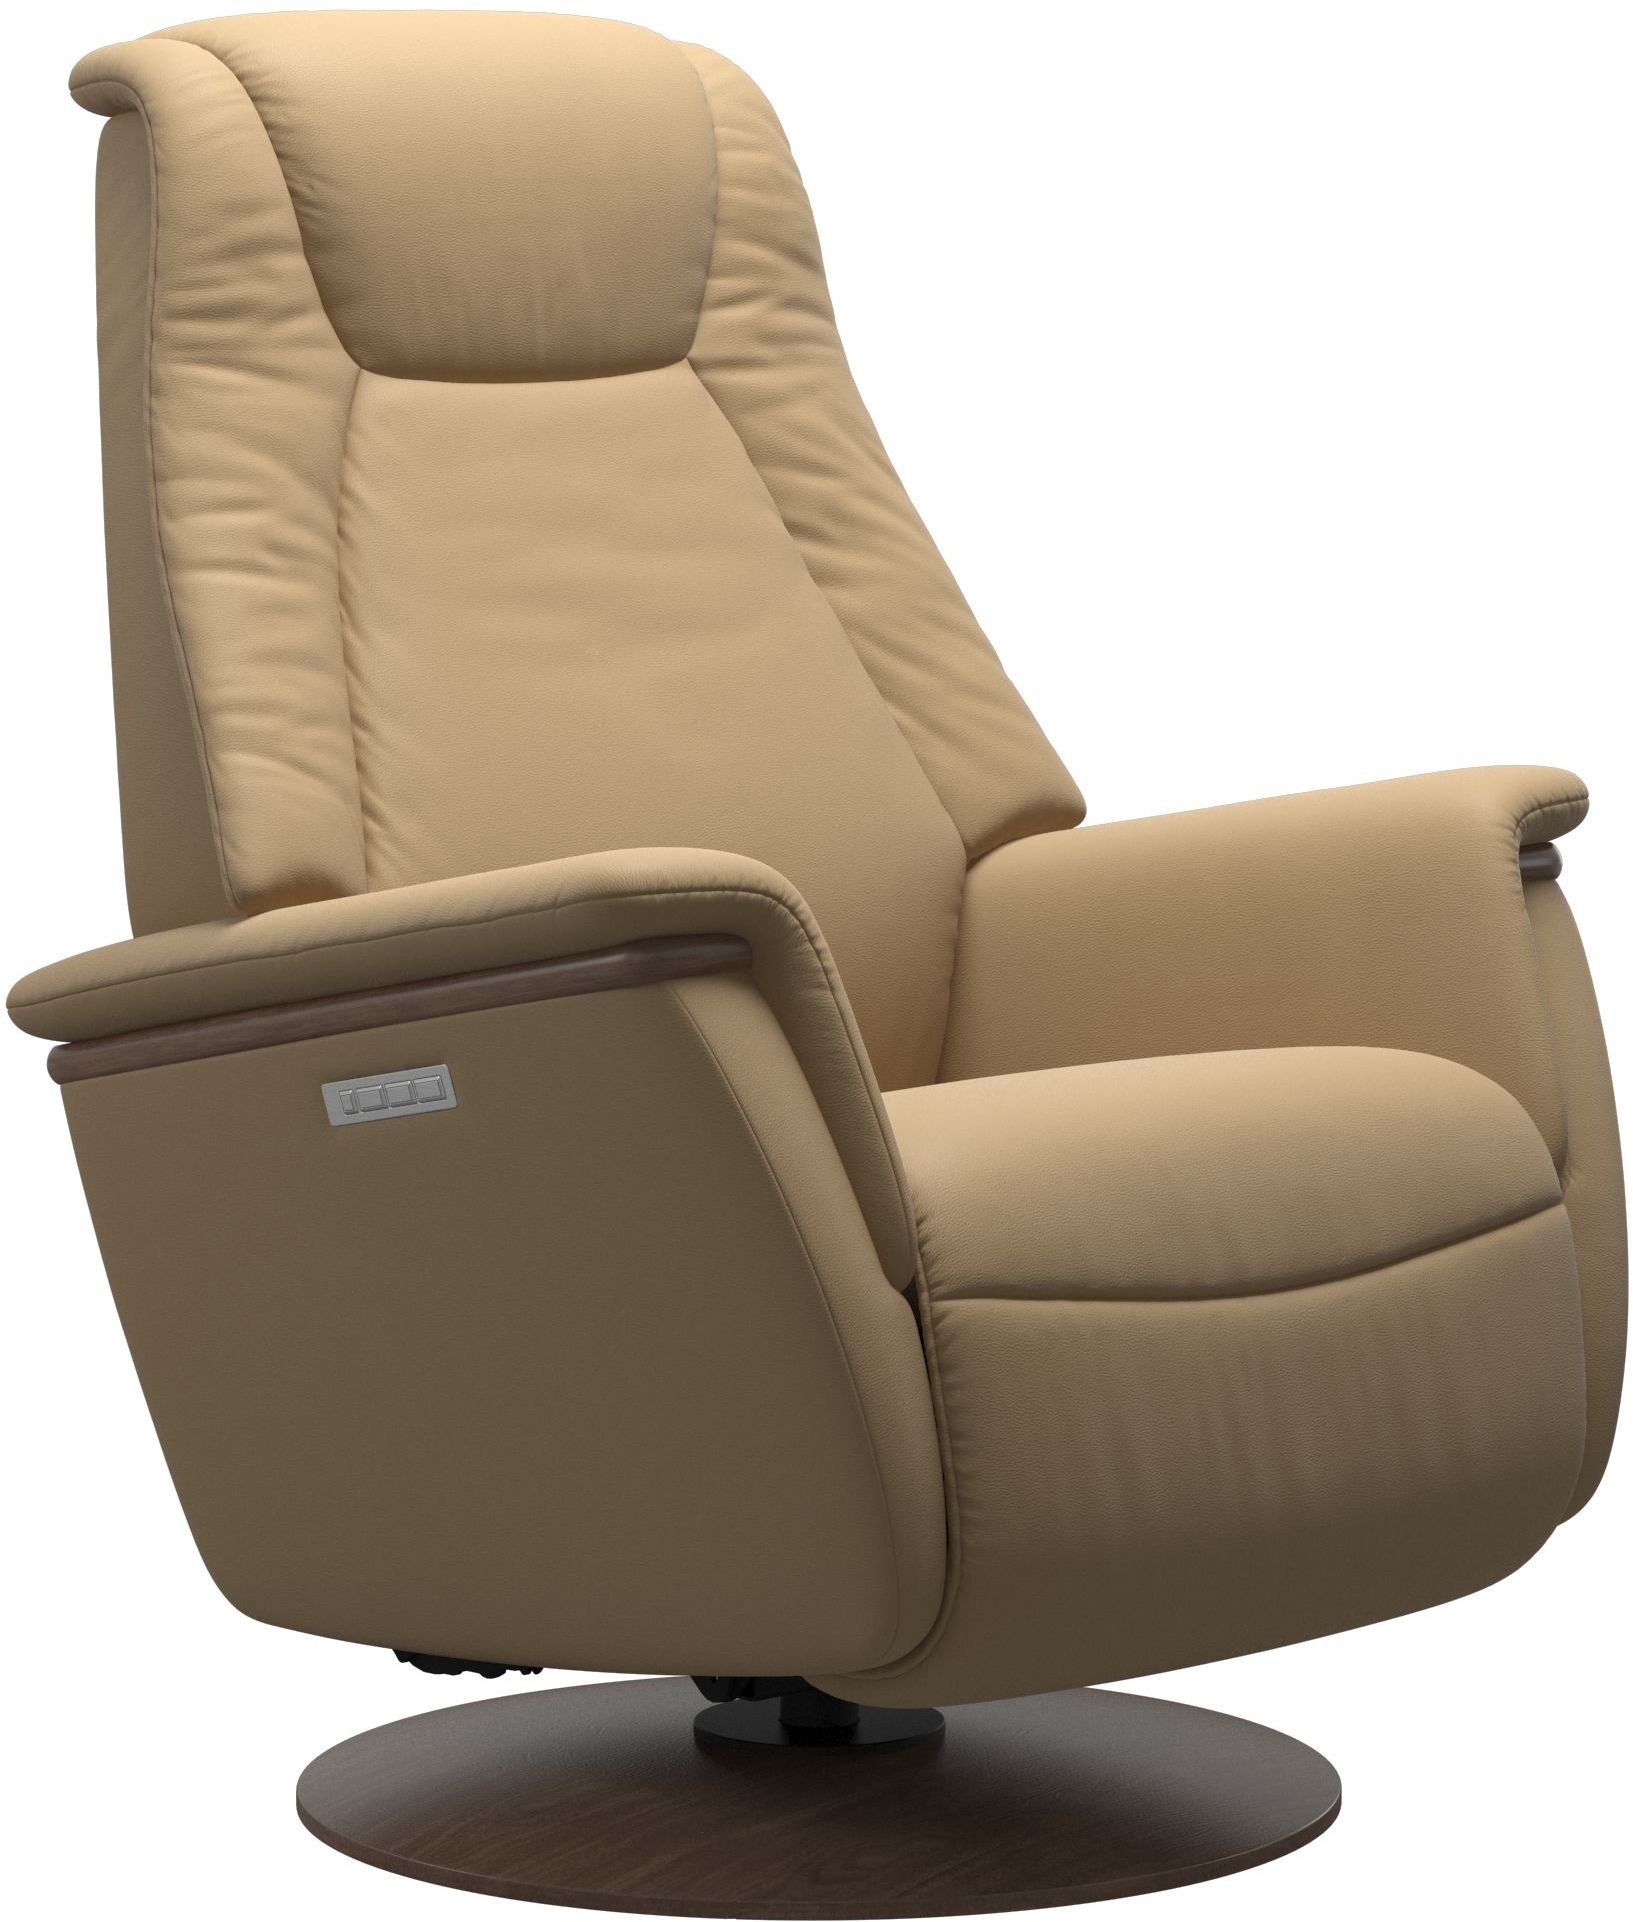 Stressless® by Ekornes® Max Large All Leather Sand Power Swivel Recliner Chair